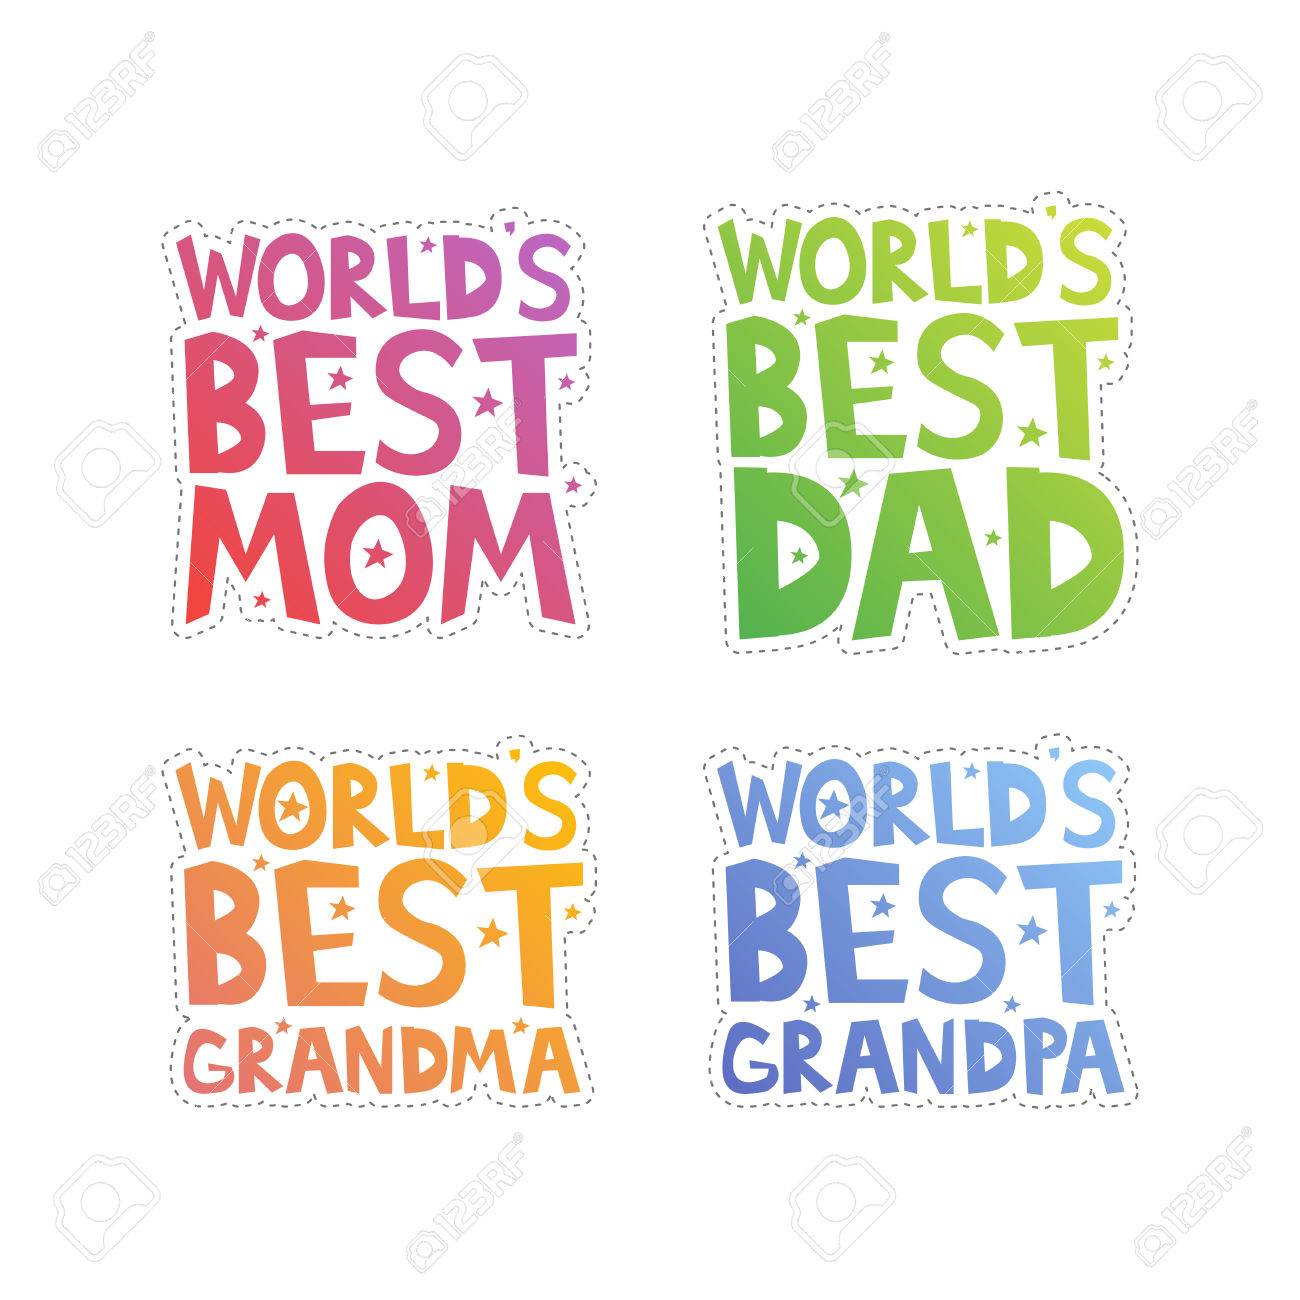 and mom dad best